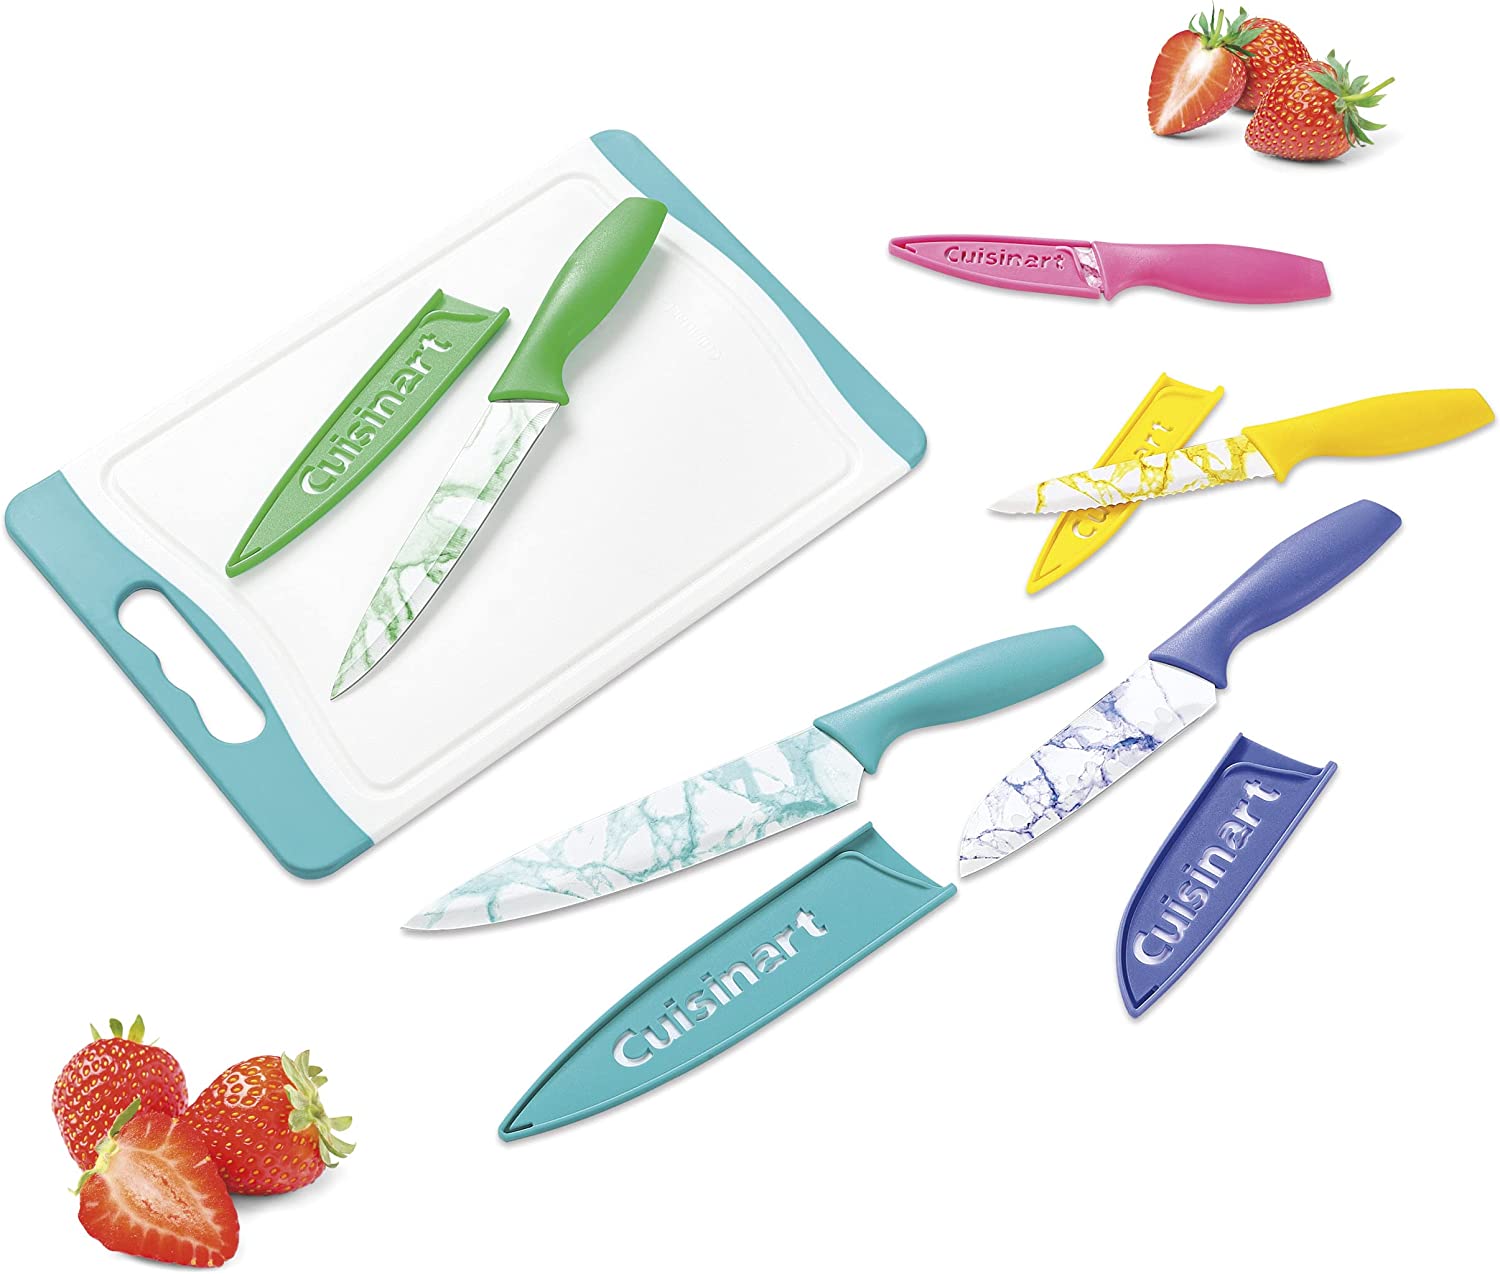 11-Pc Cuisinart Advantage Marble Cutlery Set w/ Blade Guards & Cutting Board (C55CB-11PM, Multicolor) $11.65 + Free Shipping w/ Prime or on $25+